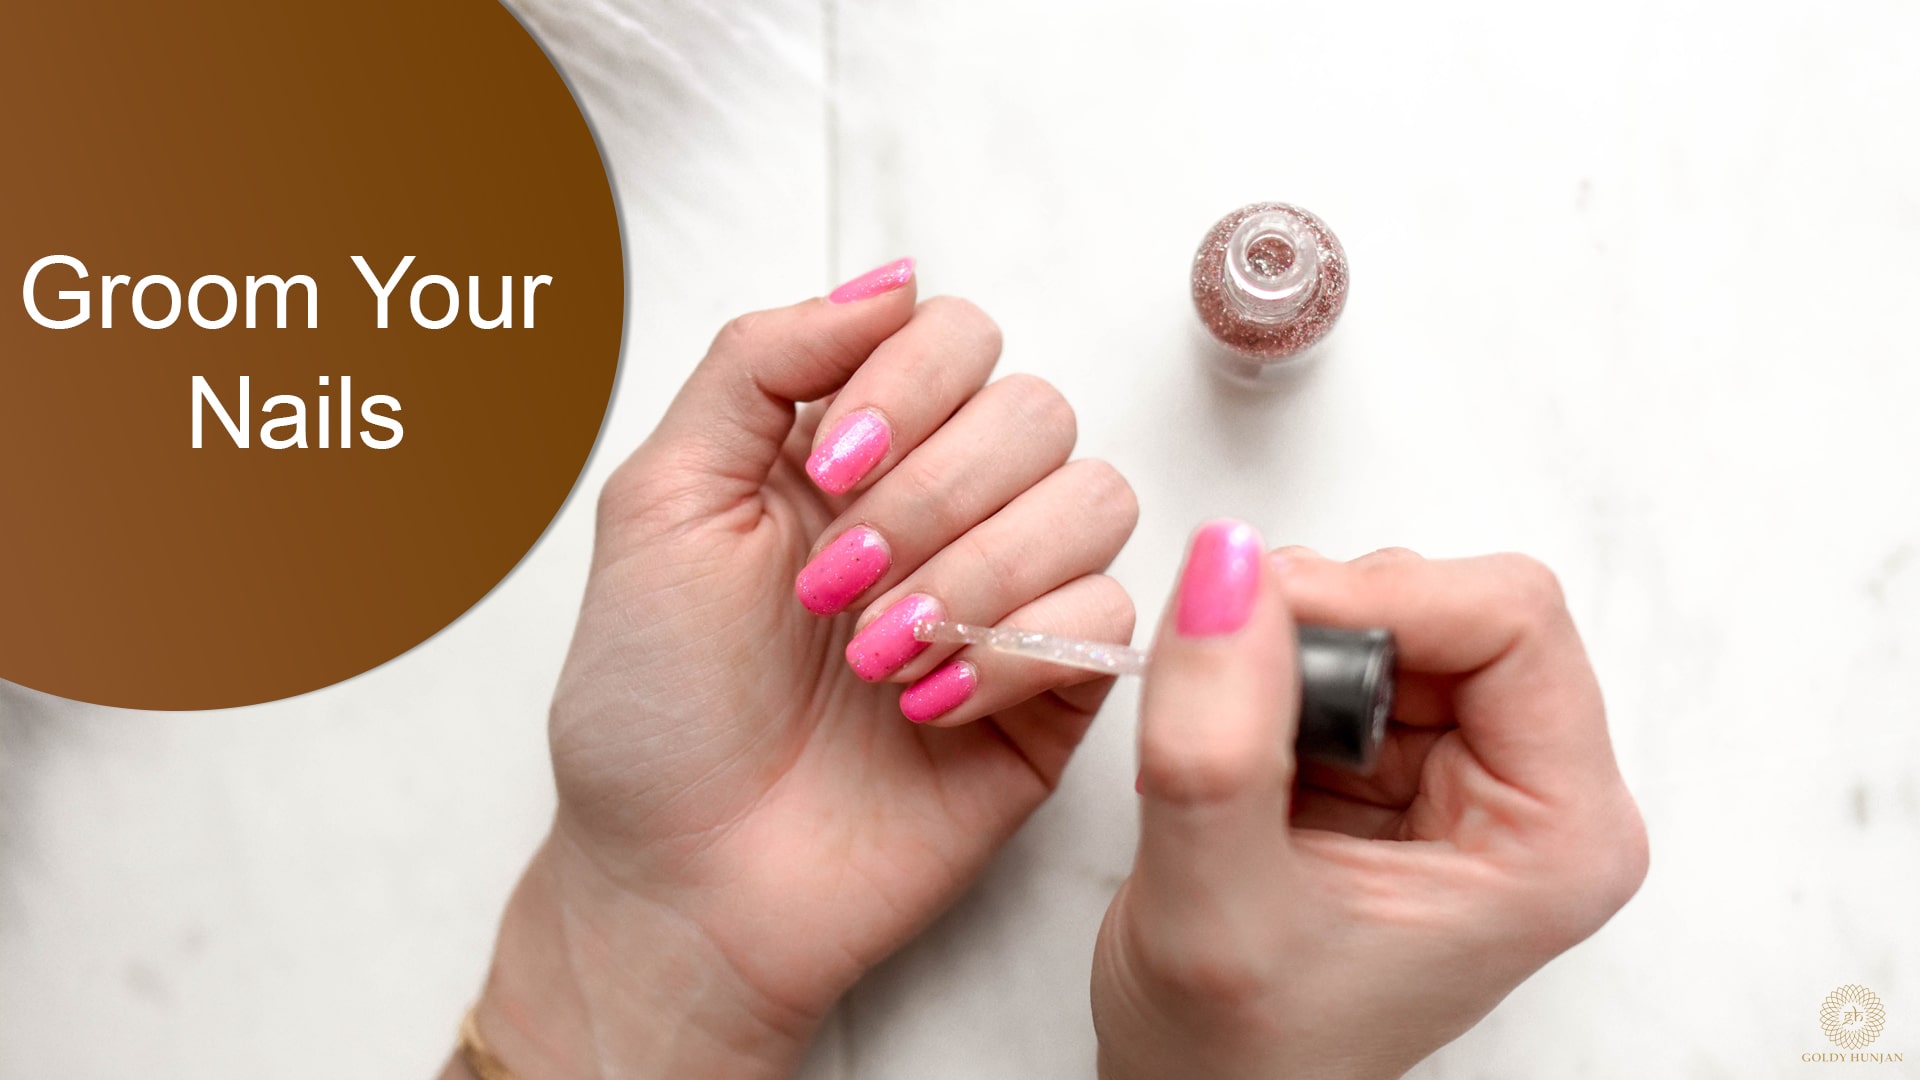 Groom your nails - Tips for perfect party look by Goldy Hunjan